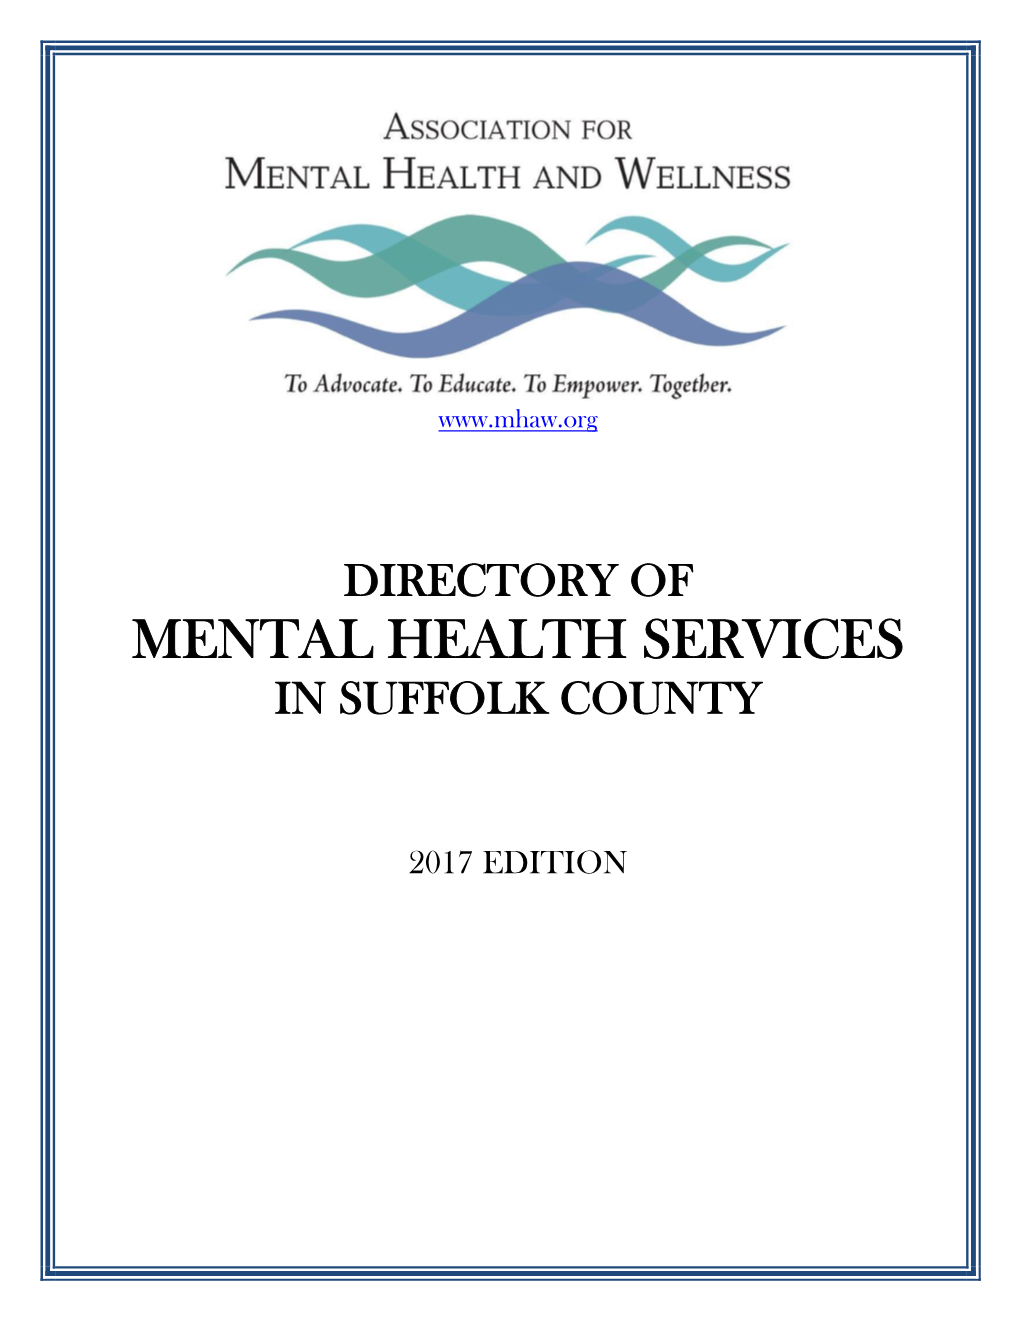 The Mental Health Association in Suffolk County